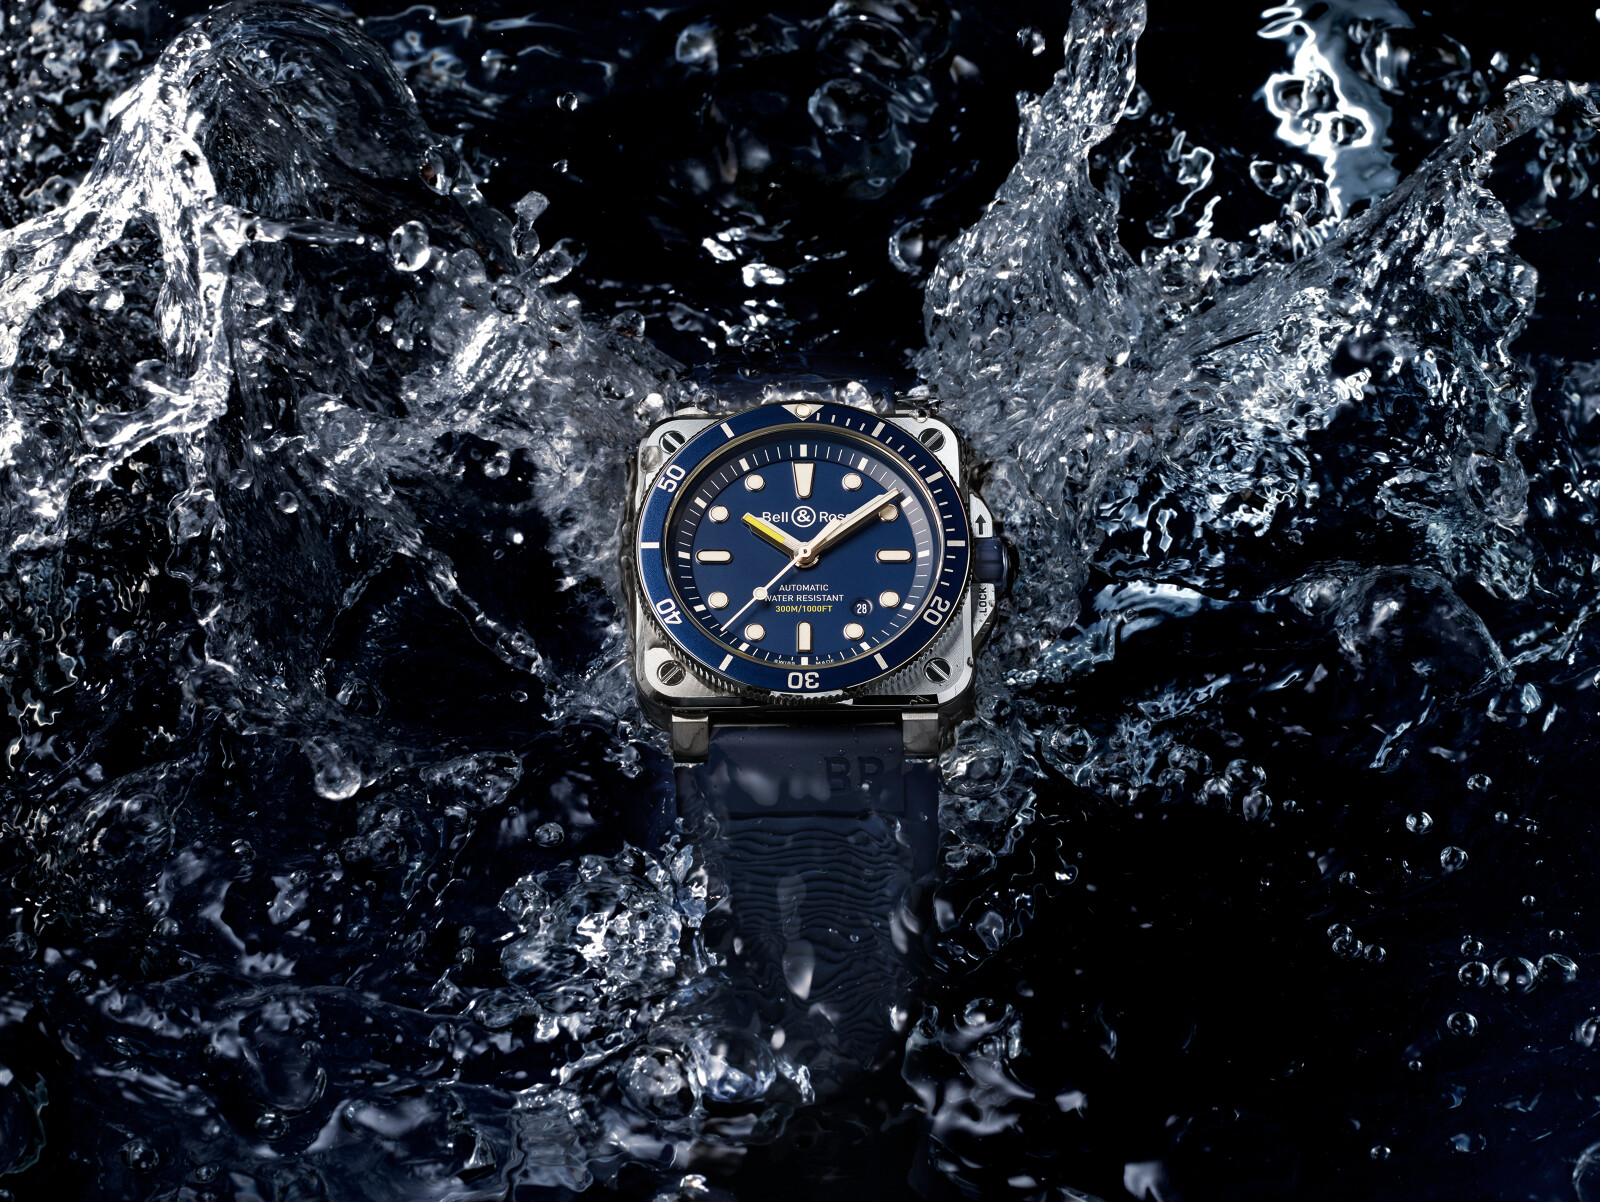 BELL & ROSS DIVER CAMPAIGN